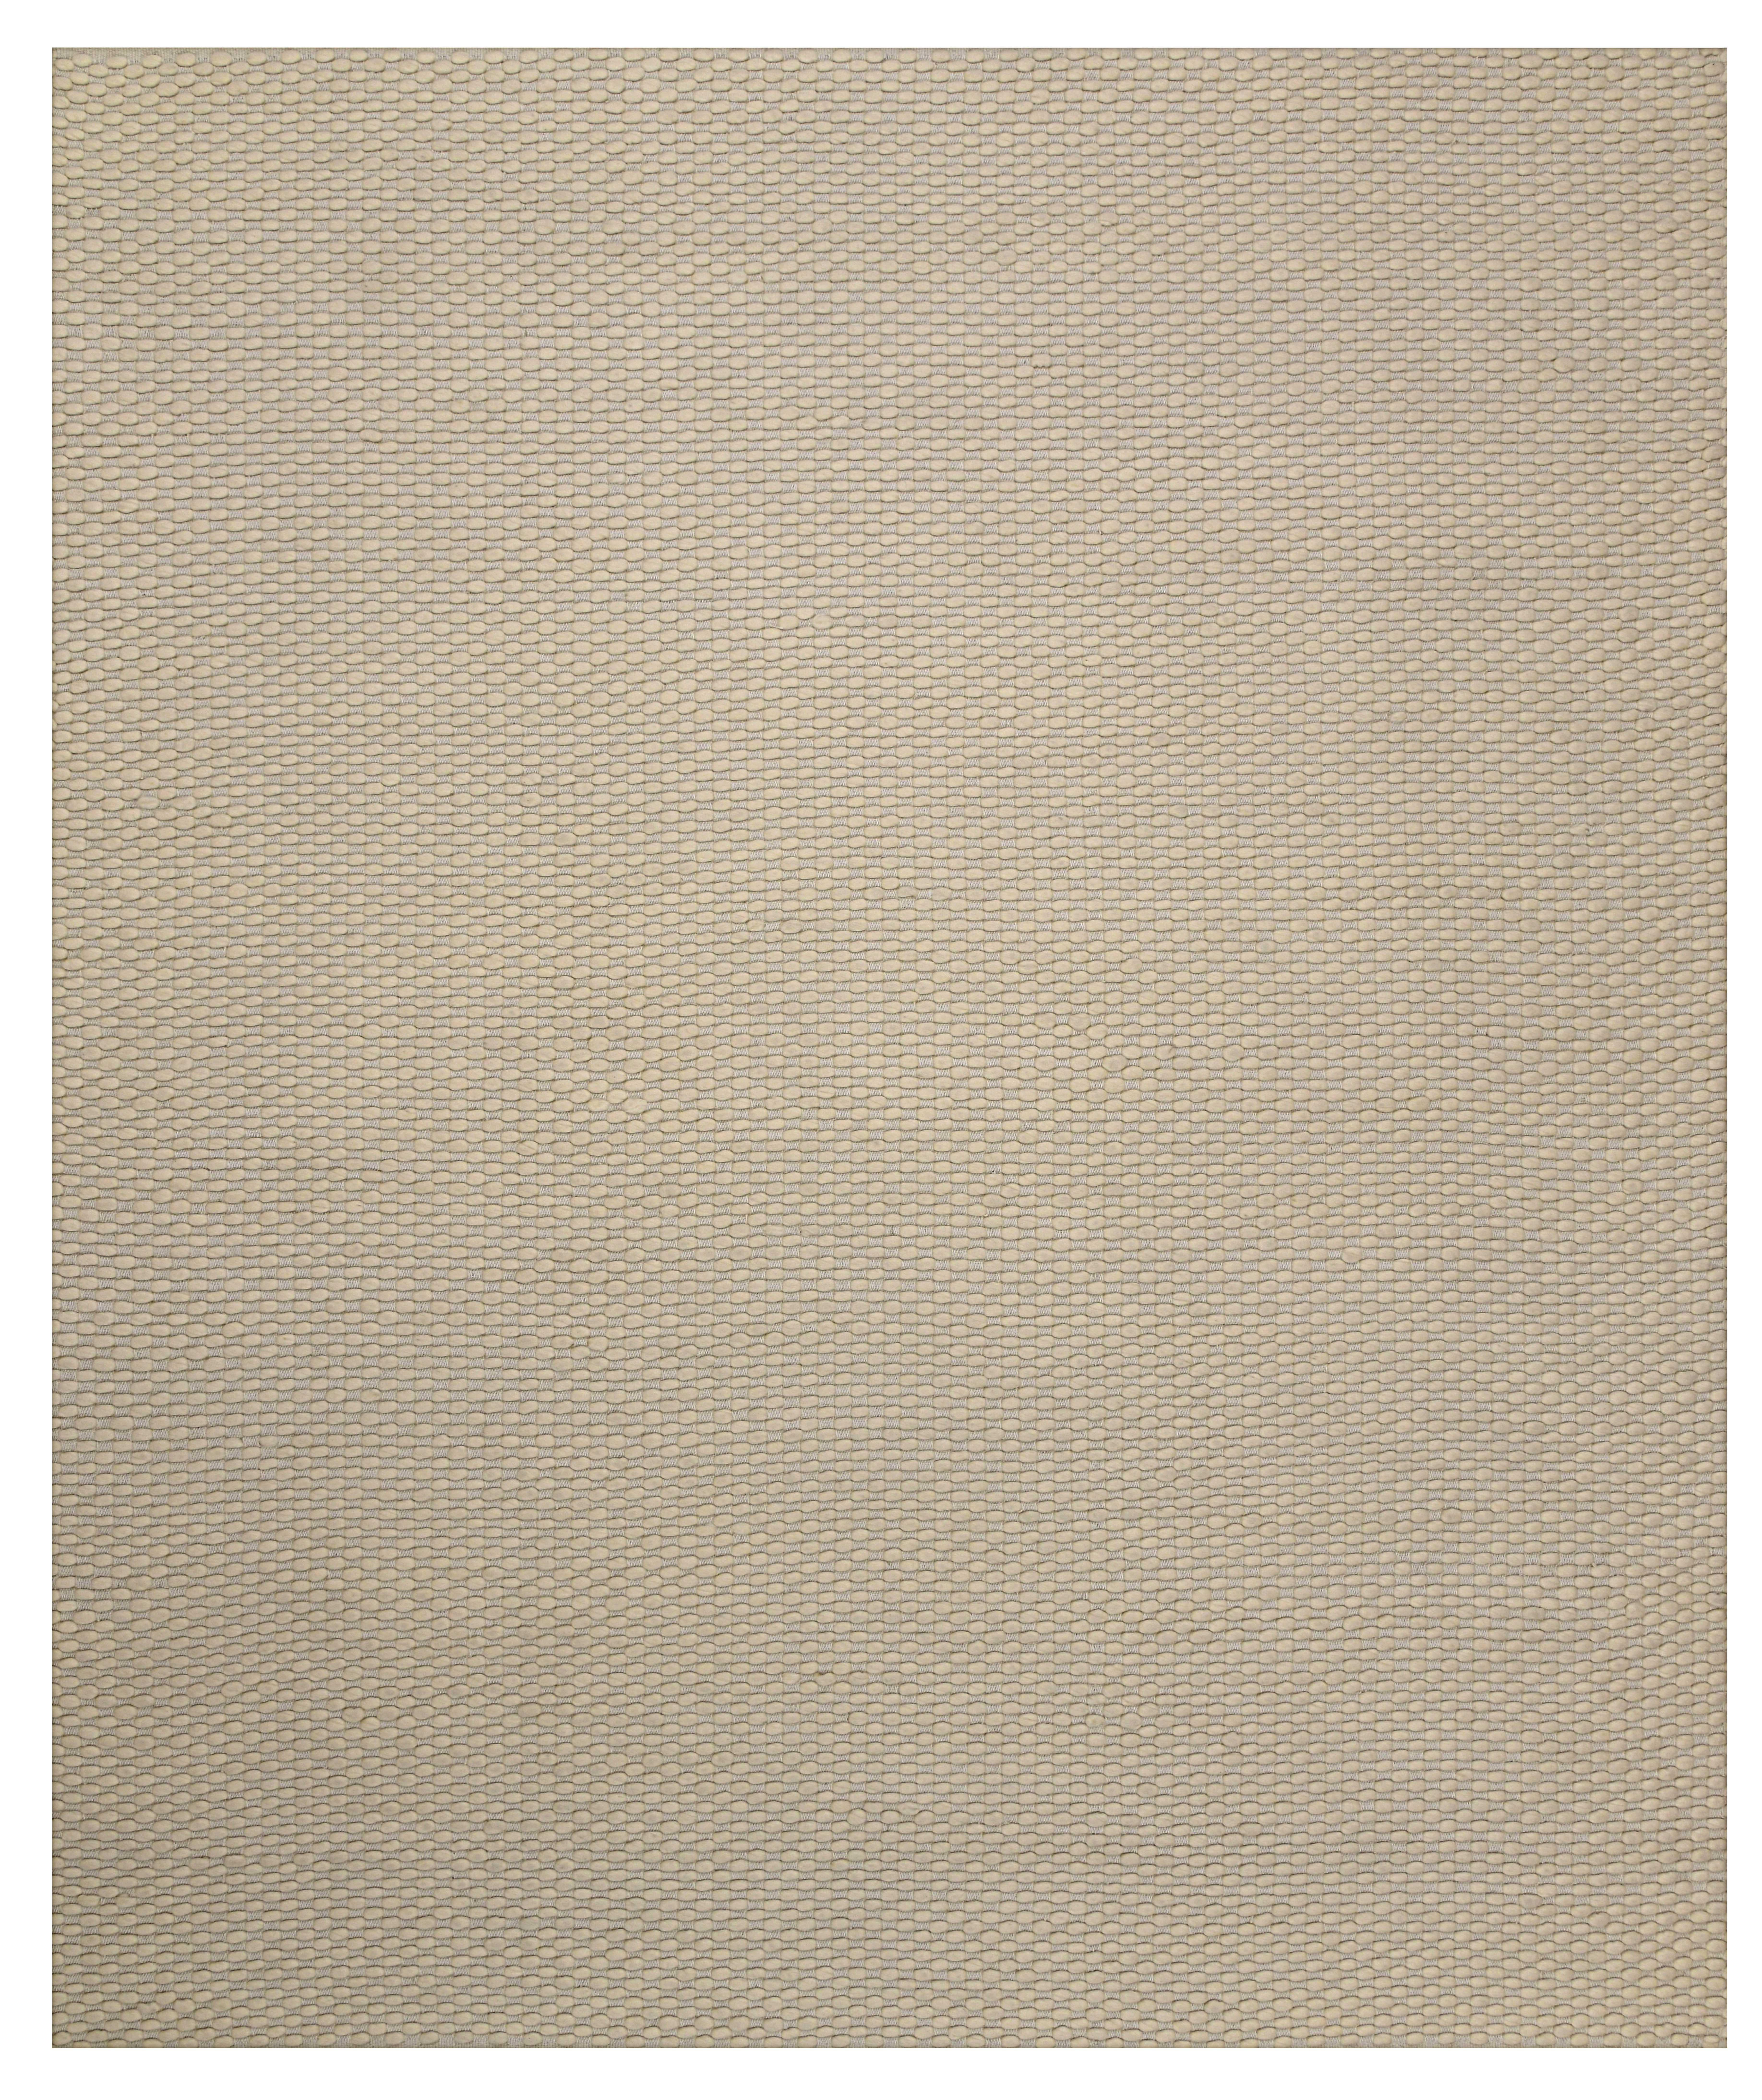 Indian Choma, Oat, Handwoven Face 72% Undyed New Zealand Wool/28% Cotton, 9' x 12' For Sale